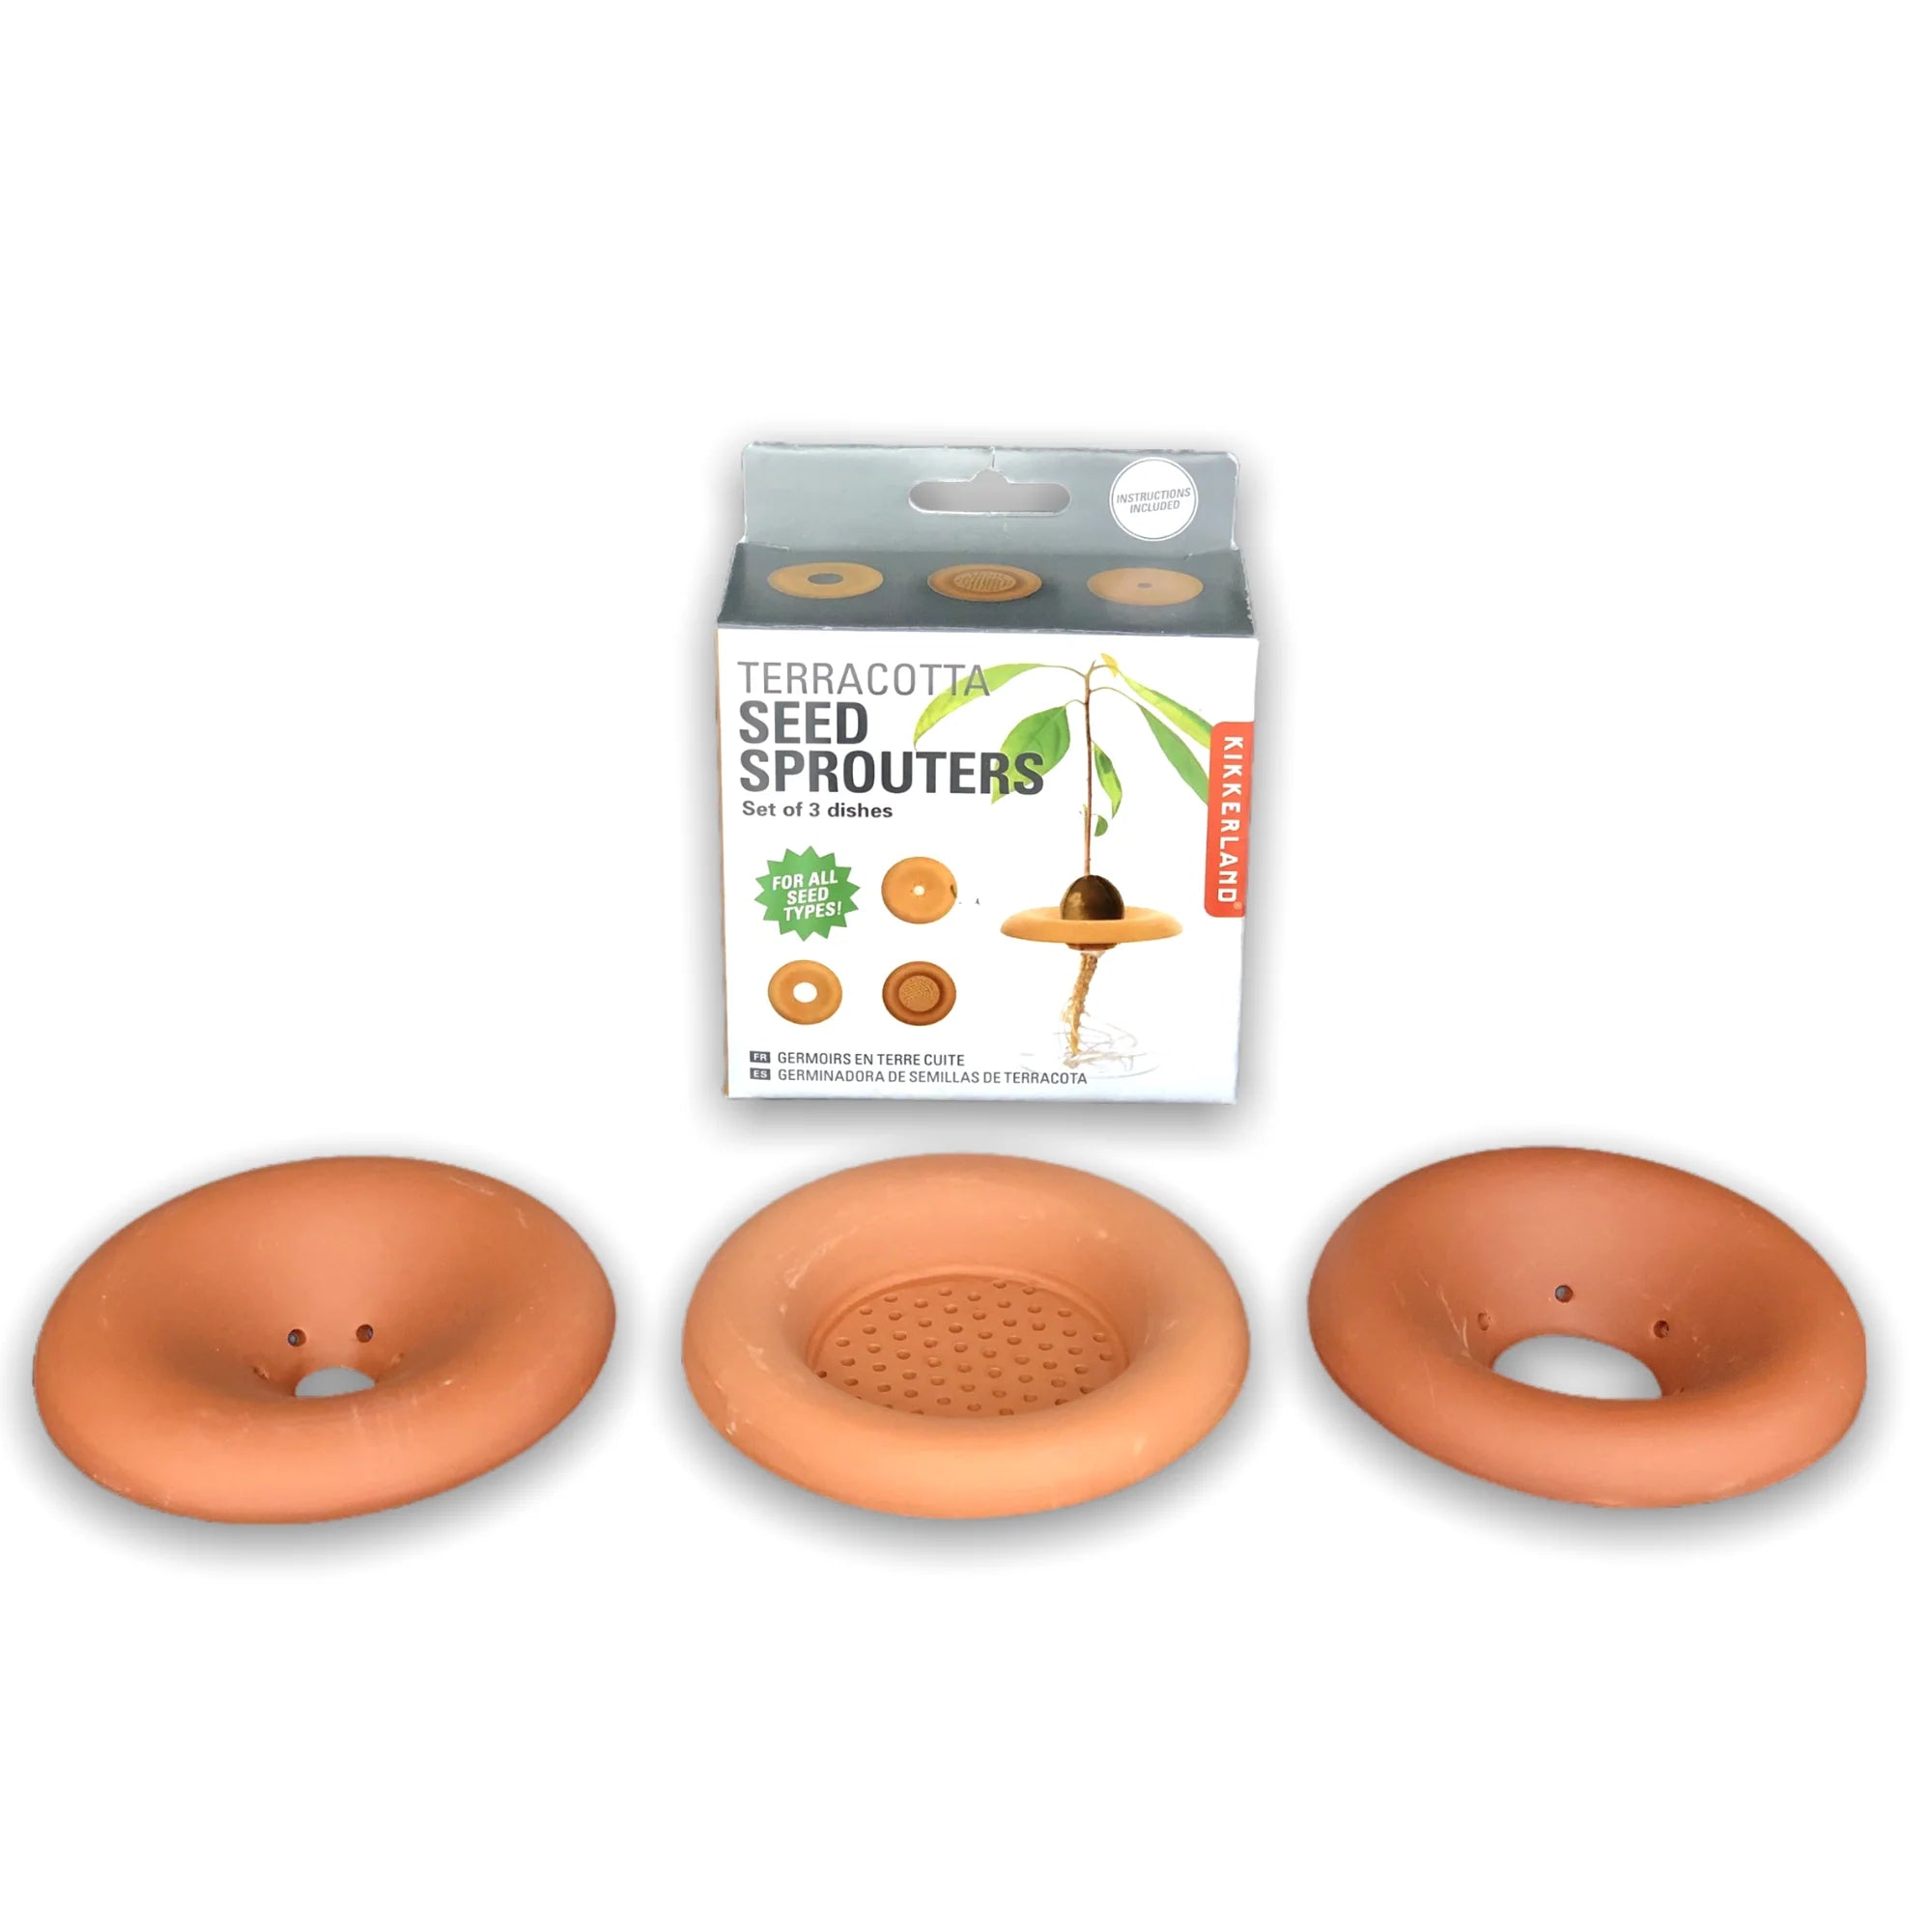 Terracotta Seed Sprouters Kit